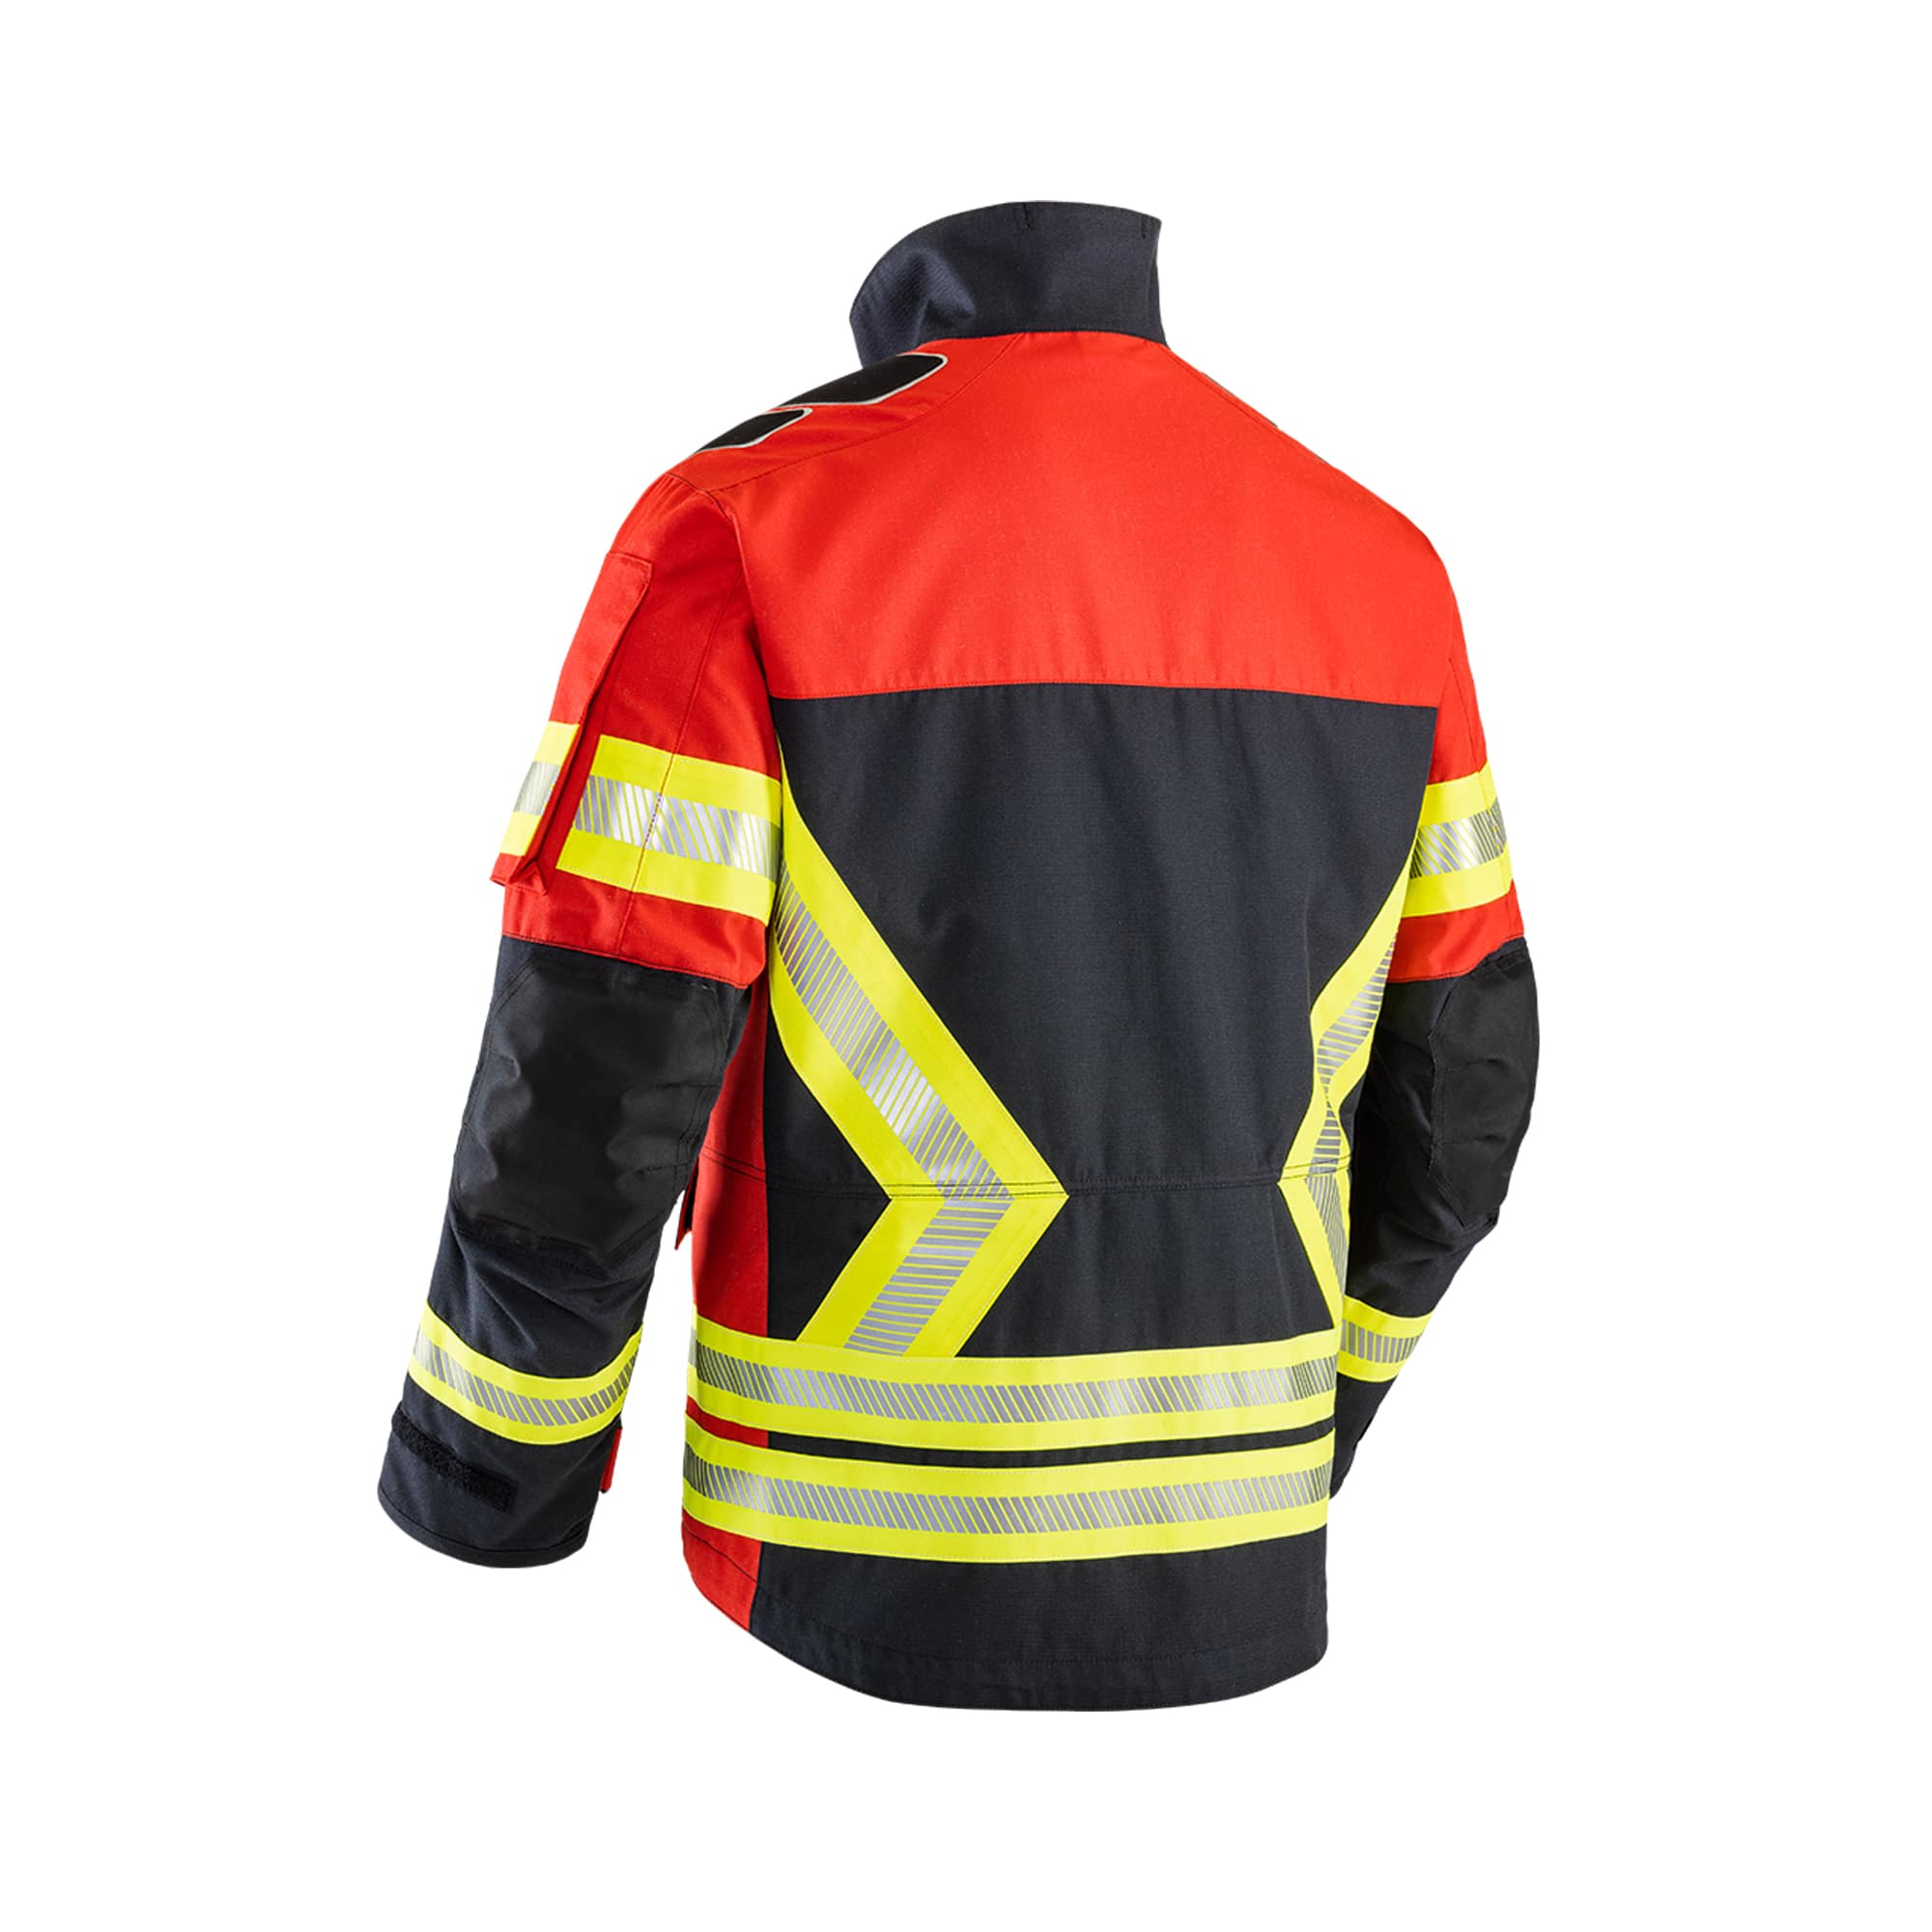 Protective firefighting suit Texport Fire Recon